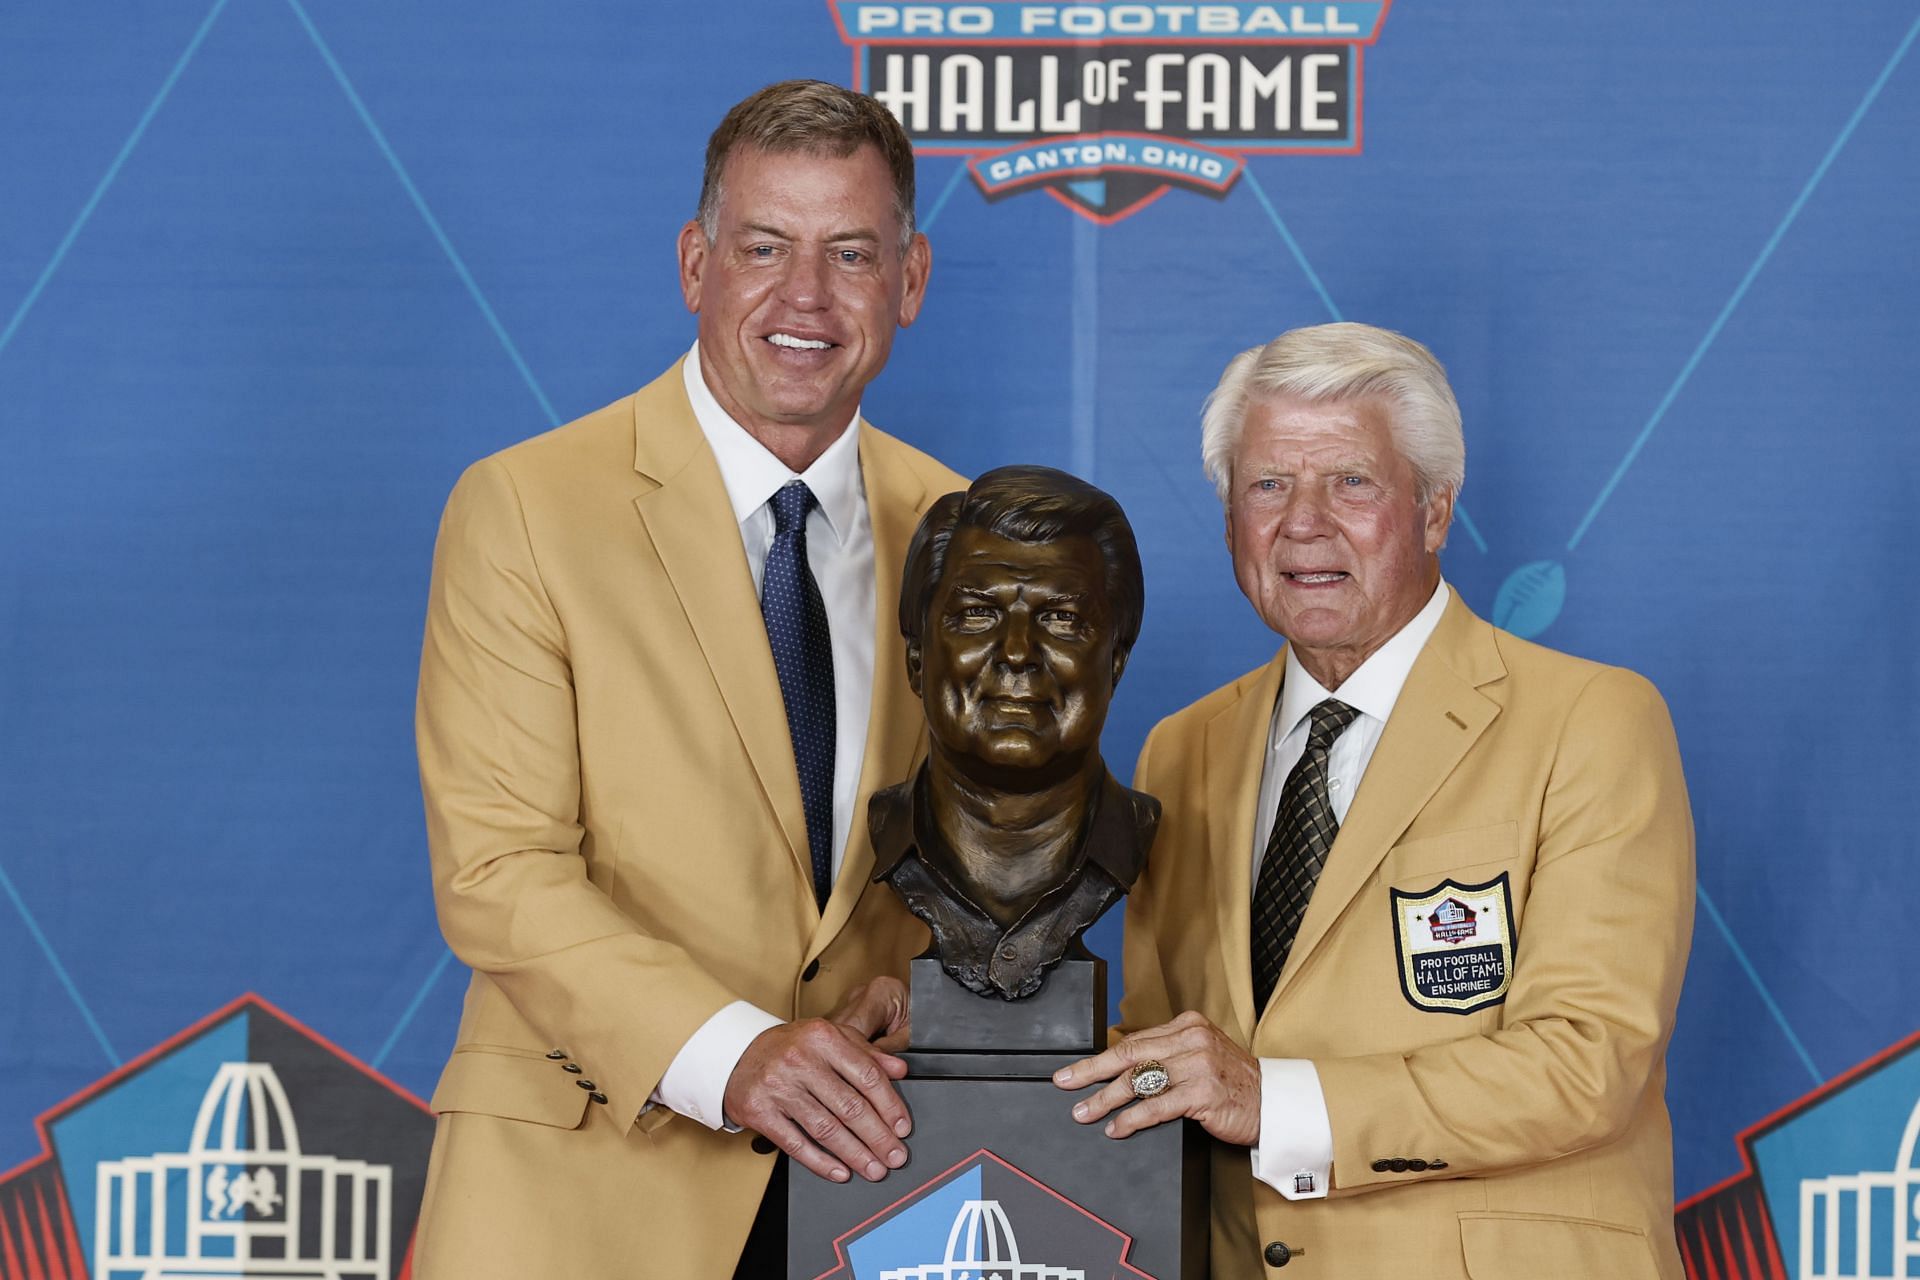 Hall of Famers Troy Aikman and Jimmy Johnson